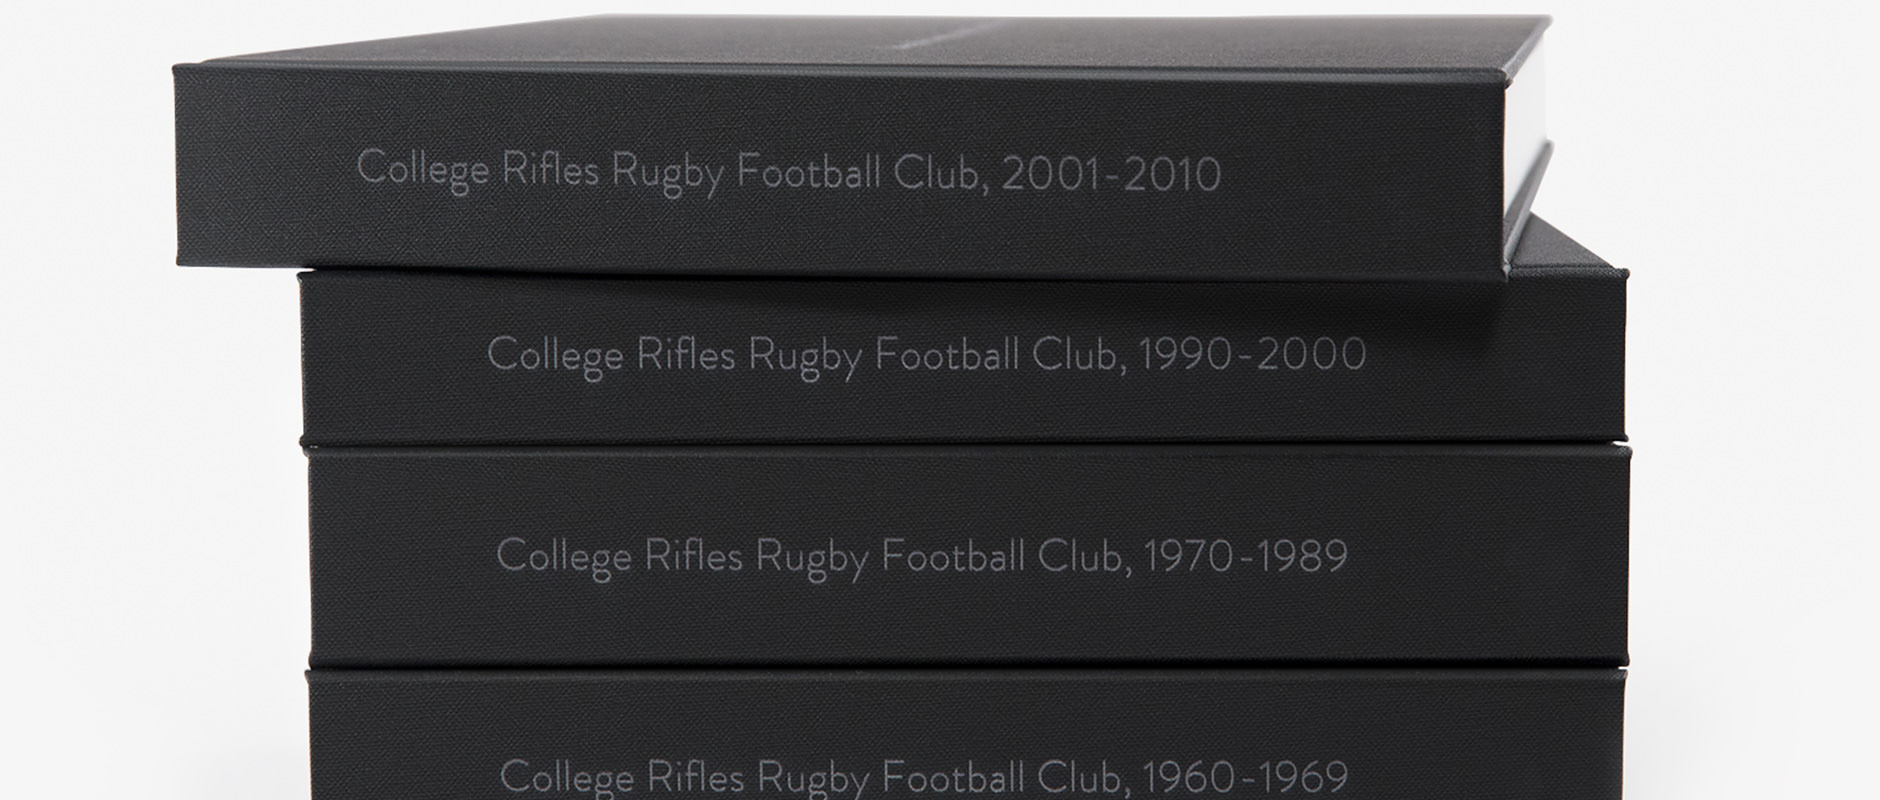 Stack of College Rifles photo books.